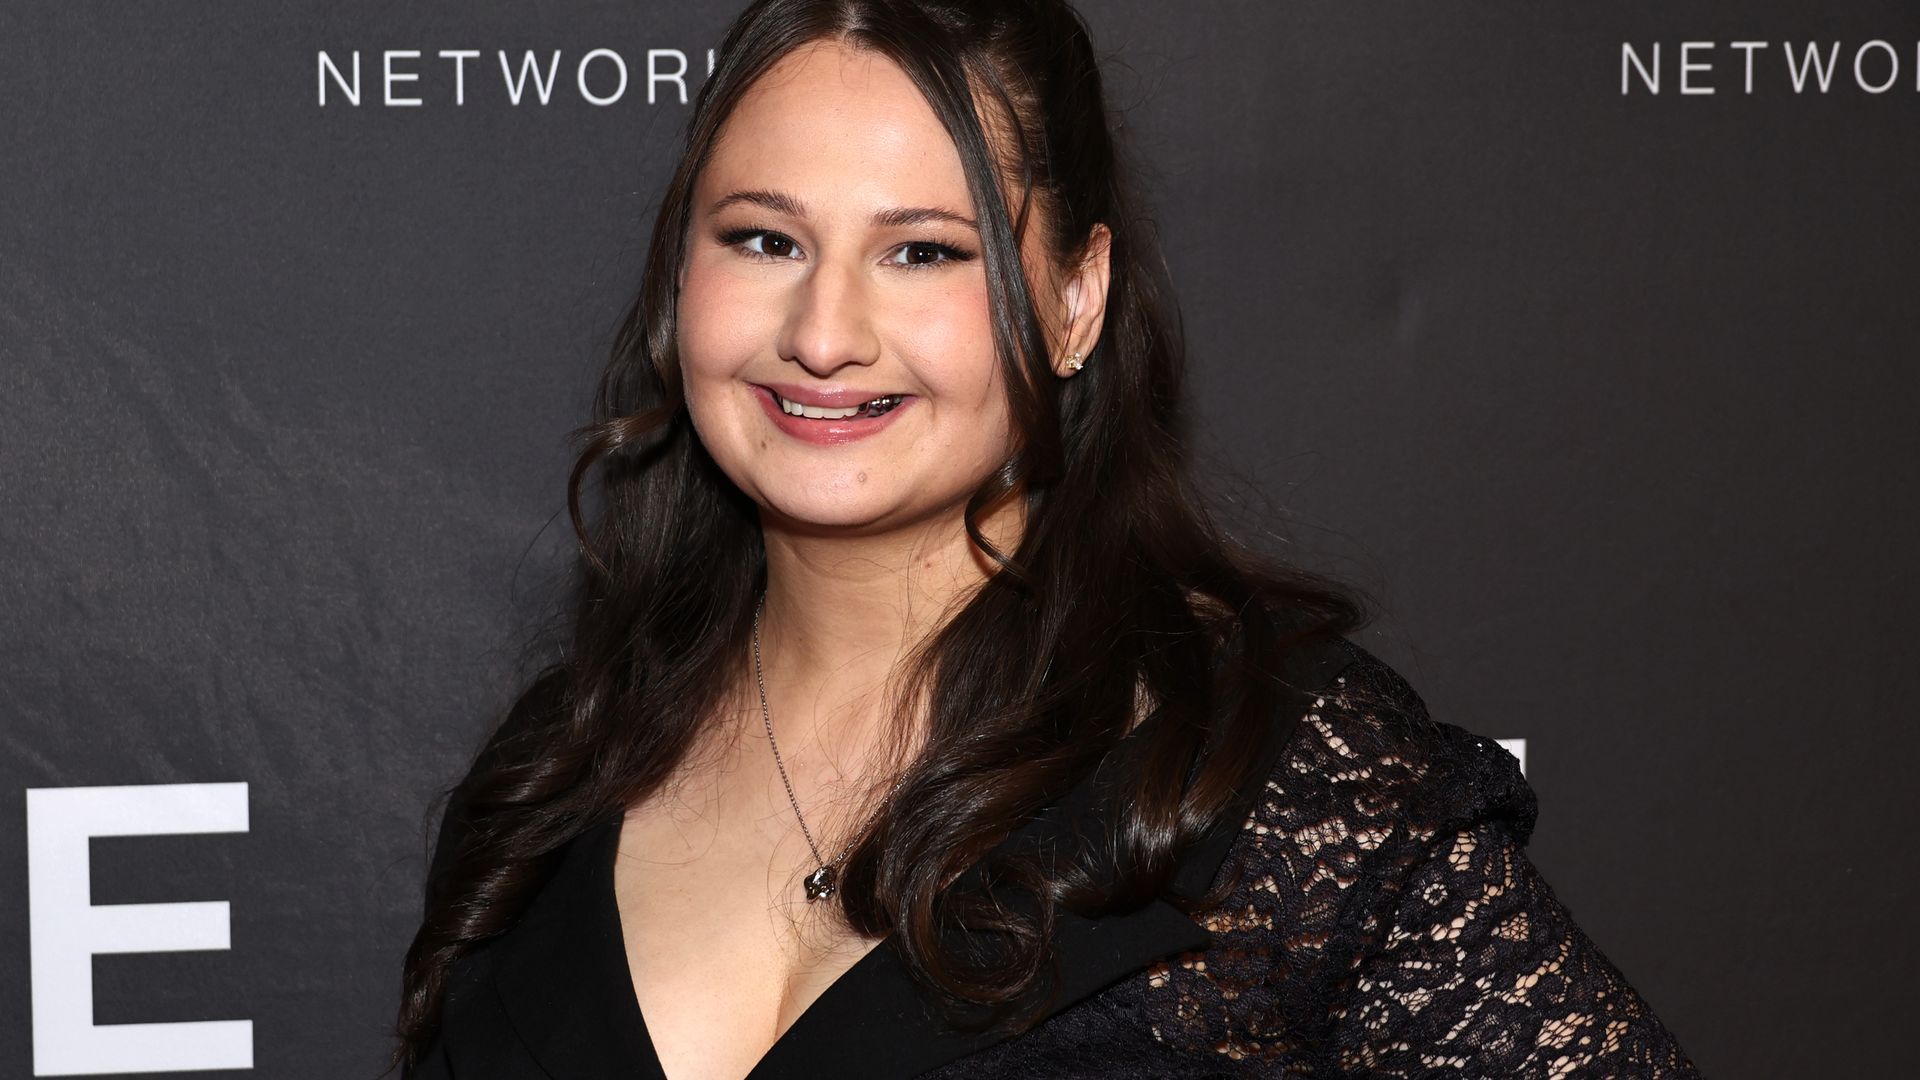 Gypsy Rose Blanchard's cryptic message about wasting time revealed just hours after split from husband 3 months out of prison